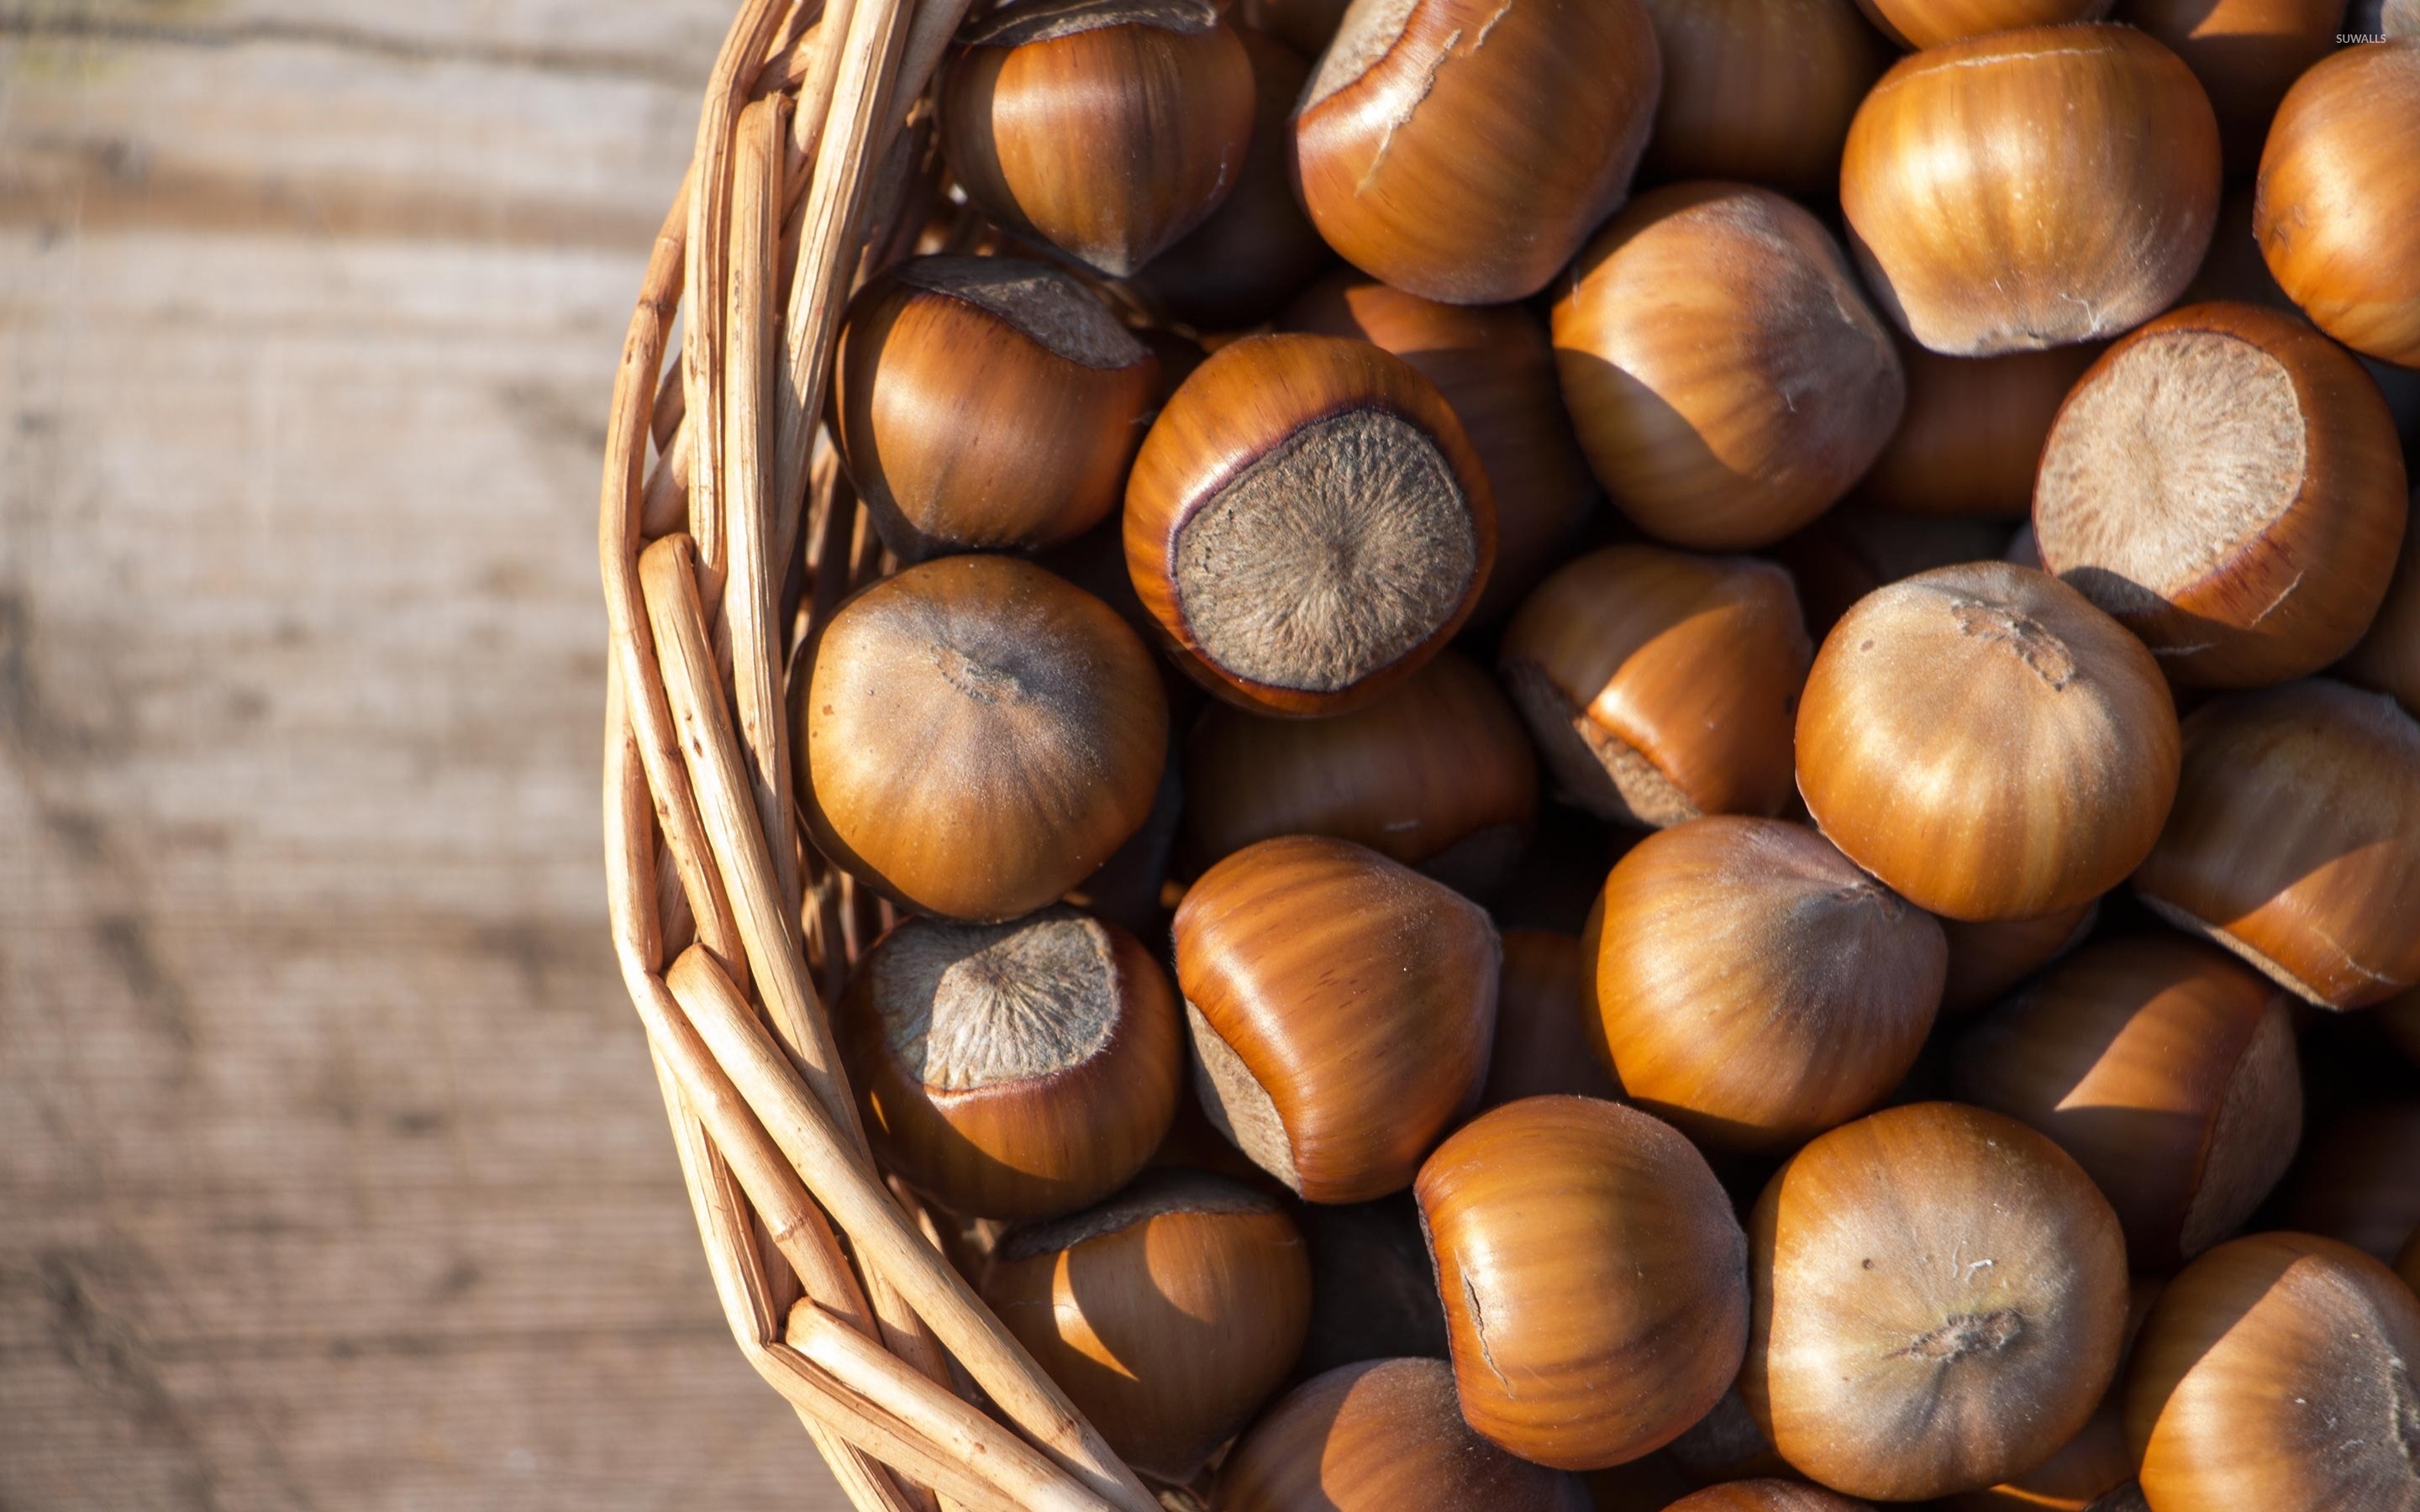 Hazelnuts: Have the sweet-tasting, cream-colored kernels with a pointed tip. 2880x1800 HD Wallpaper.